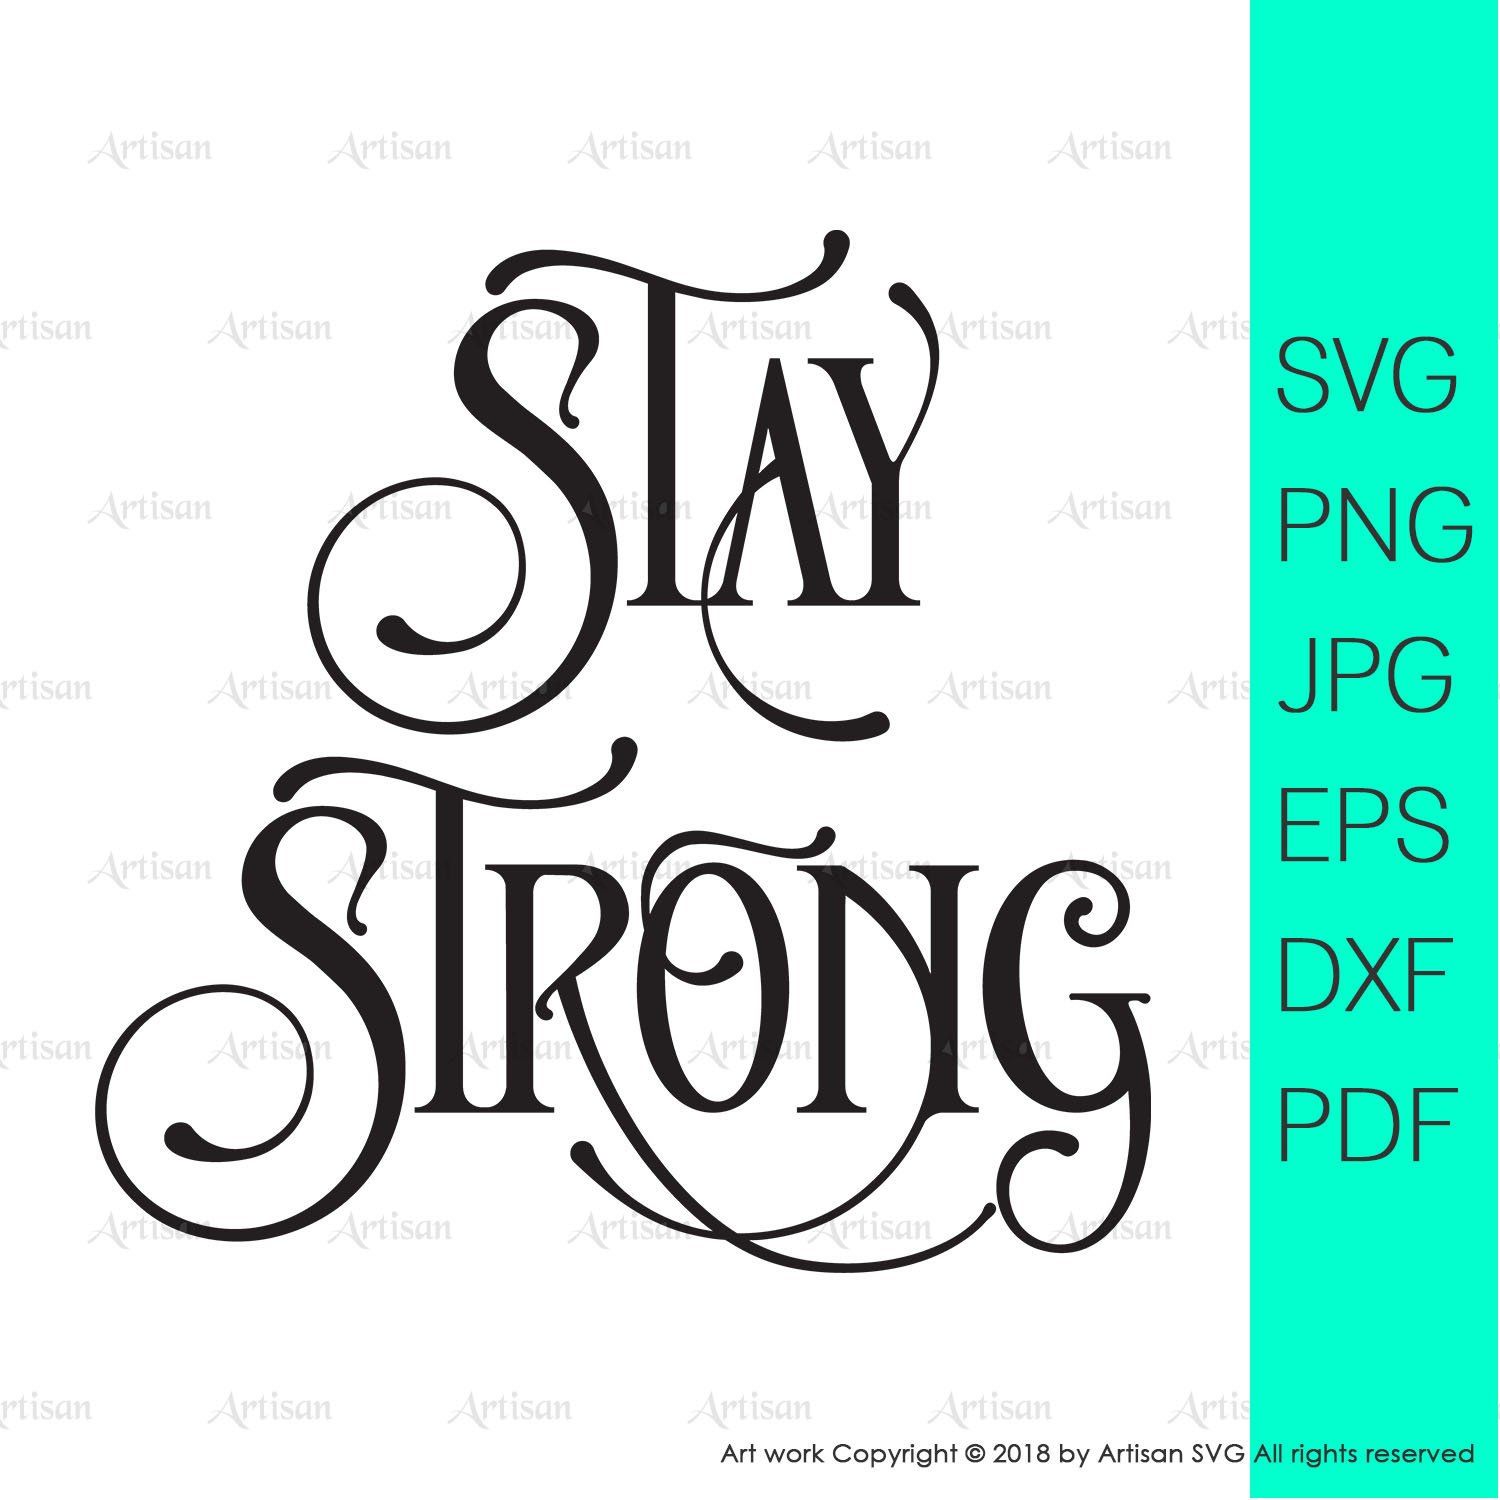 Stay strong svg.